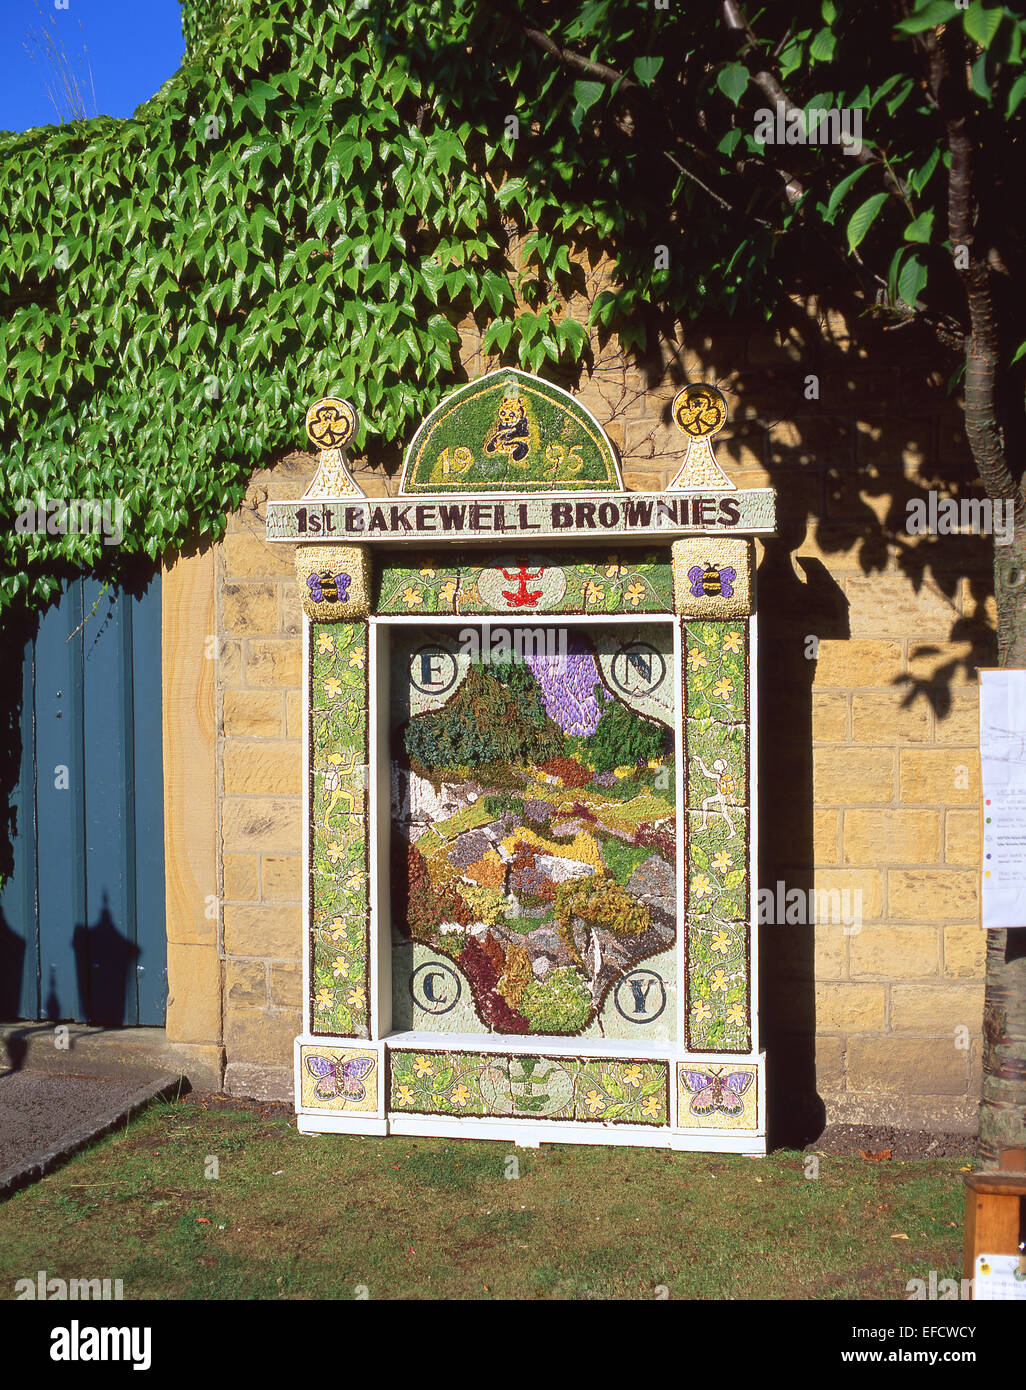 Bakewell Brownies well dressing, Rutland Square, Bakewell, Derbyshire, England, United Kingdom Stock Photo